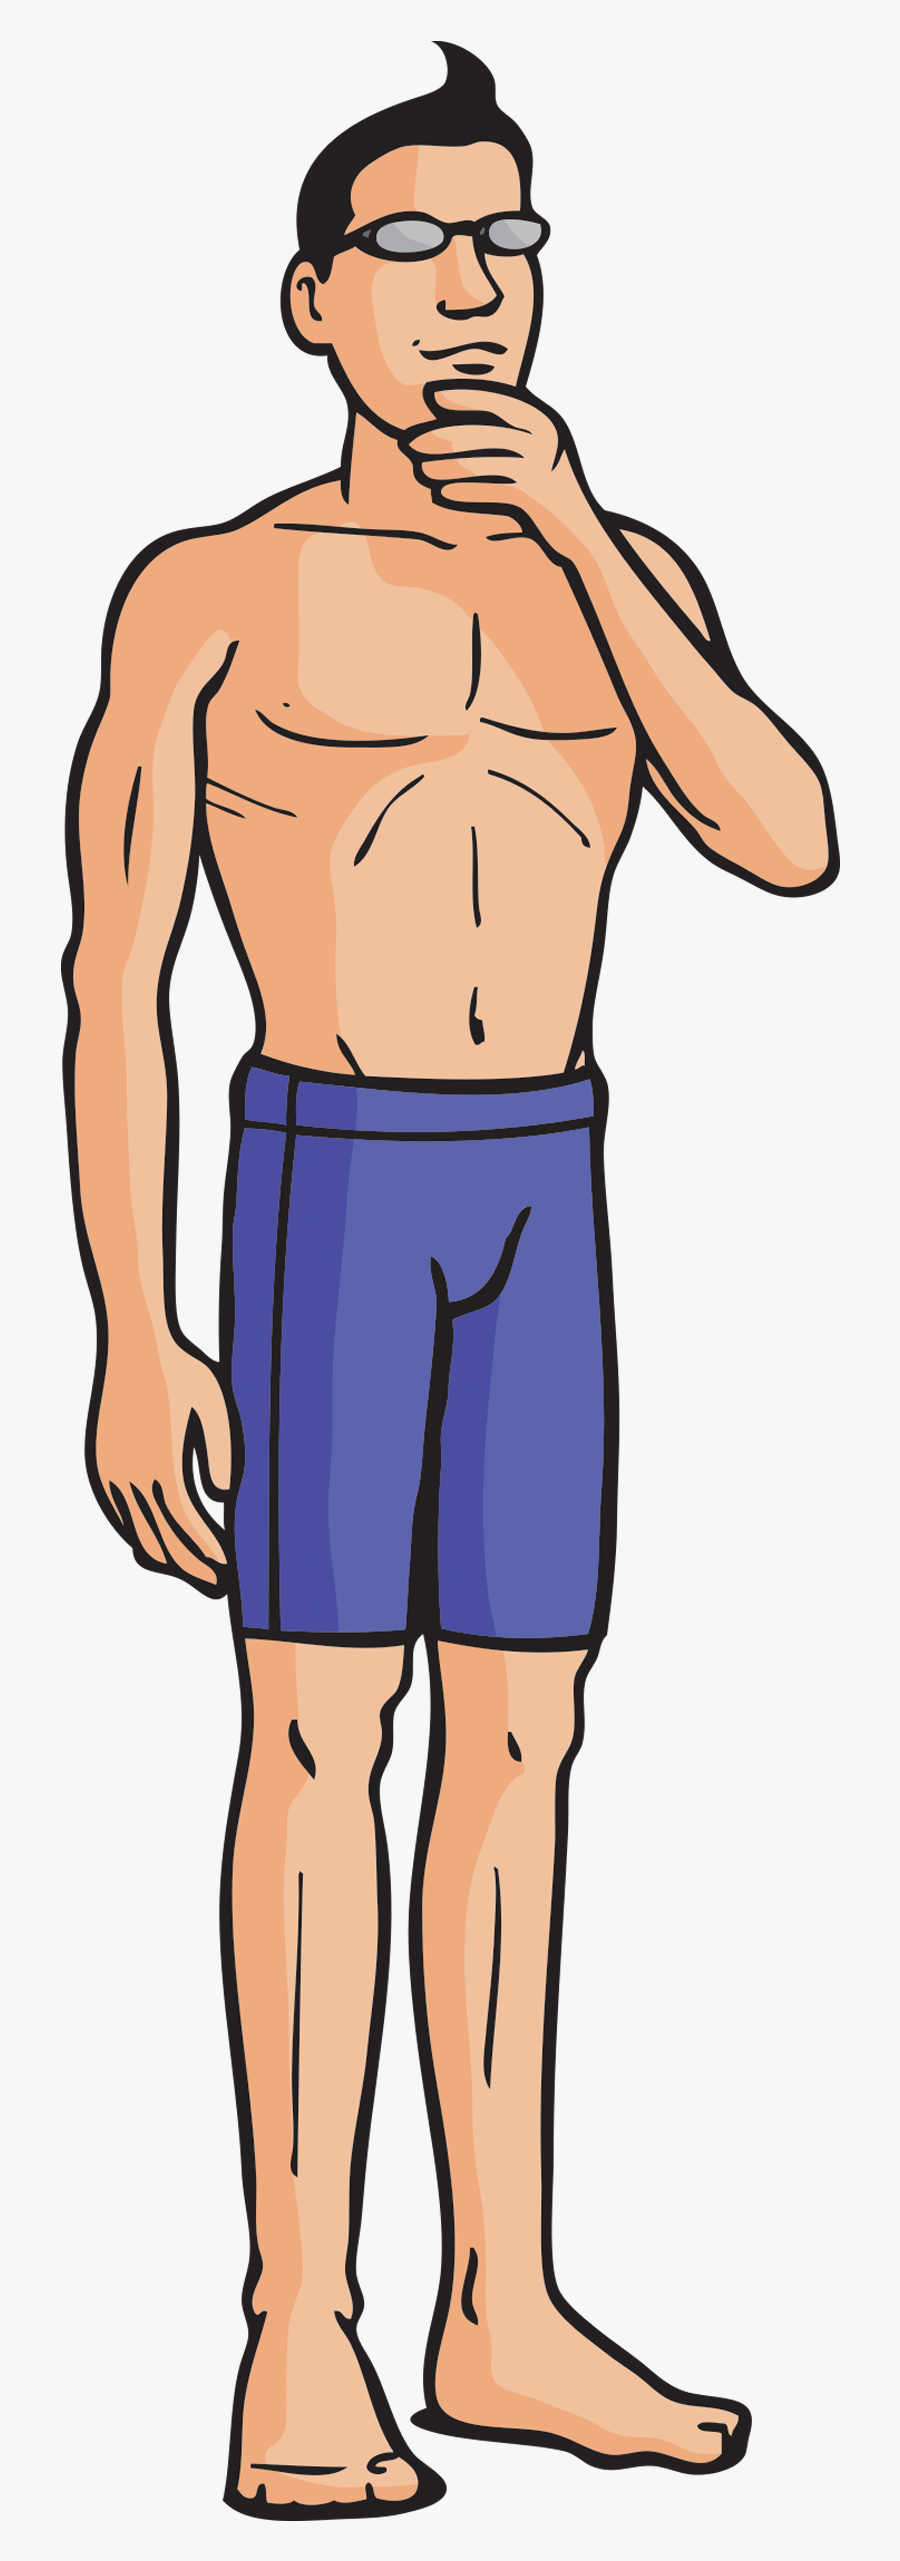 Man In Swimsuit Cartoon , Free Transparent Clipart - ClipartKey